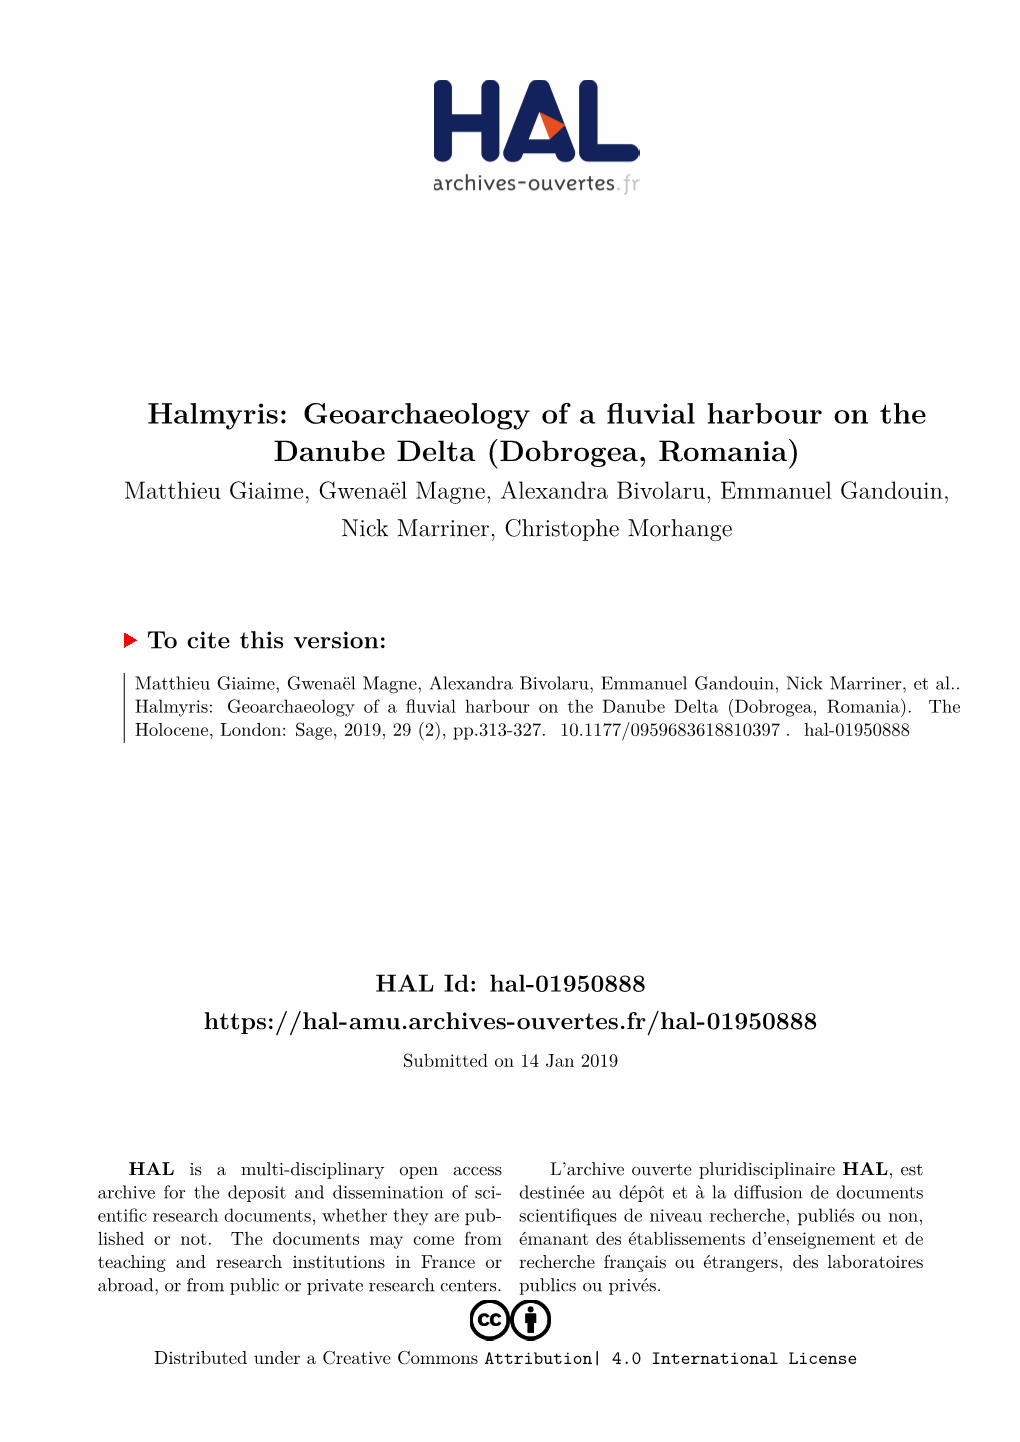 Halmyris: Geoarchaeology of a Fluvial Harbour on the Danube Delta